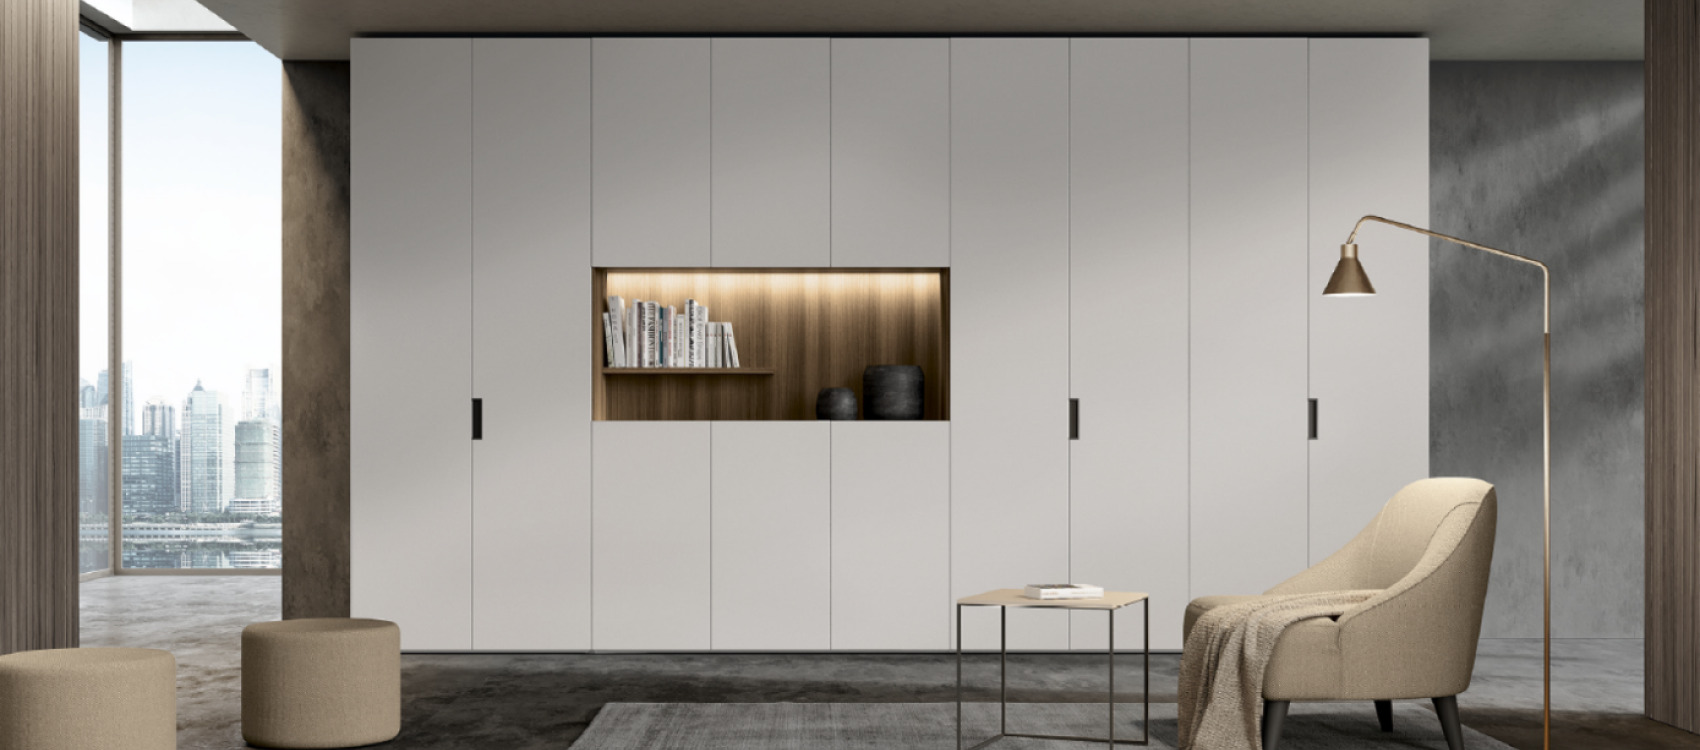 Tall wardrobes by Colombini in Grigio Dorian finish with wood effect niche